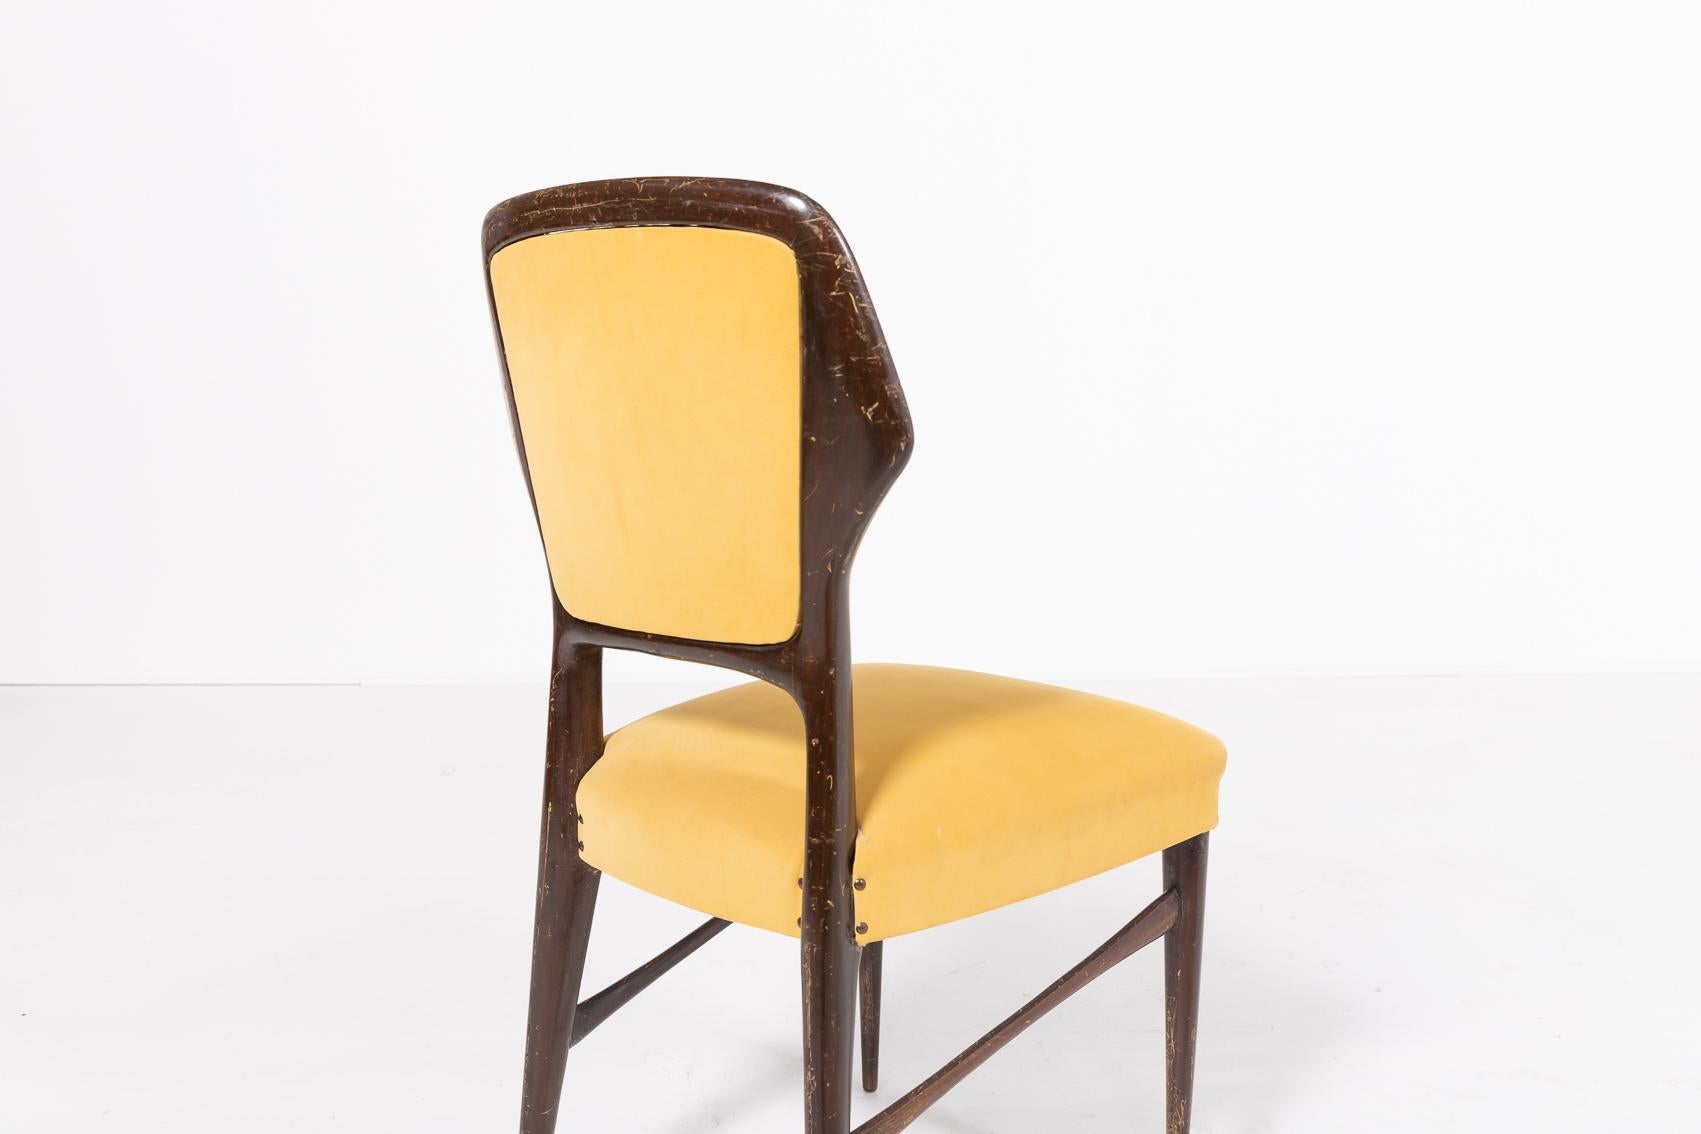 Italian Mid-Century Modern chairs from Vittorio Dassi, 1960s For Sale 1